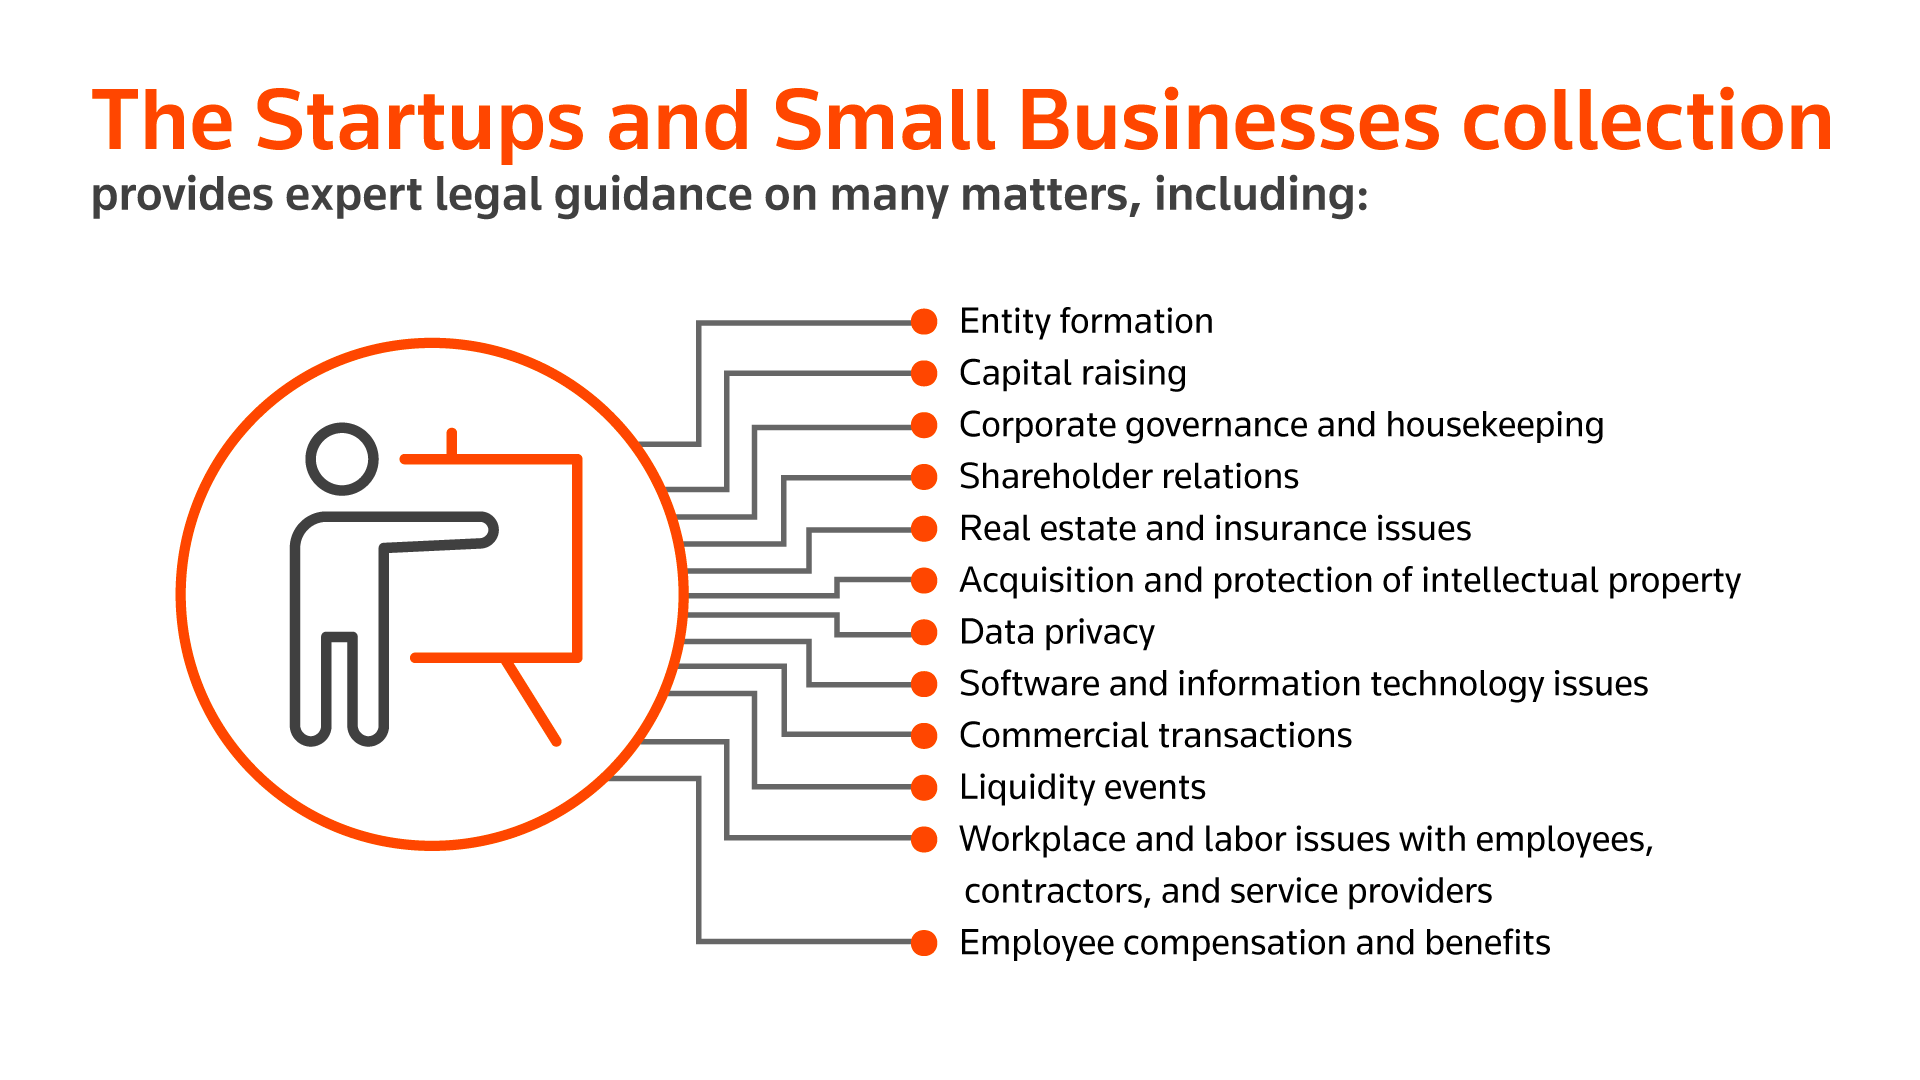 The Practical Law Startups and Small Business collection covers  matters including: entity formation, capital raising, corporate governance and housekeeping, shareholder reltaions, real estate and insurance issues, acquisition and protection of intellectual property, data privacy, software and information technology issues, commercial trnsactions, liquidity events, workplace and labor issues with employees, contractors, service providers, and employee compensation and benefits.